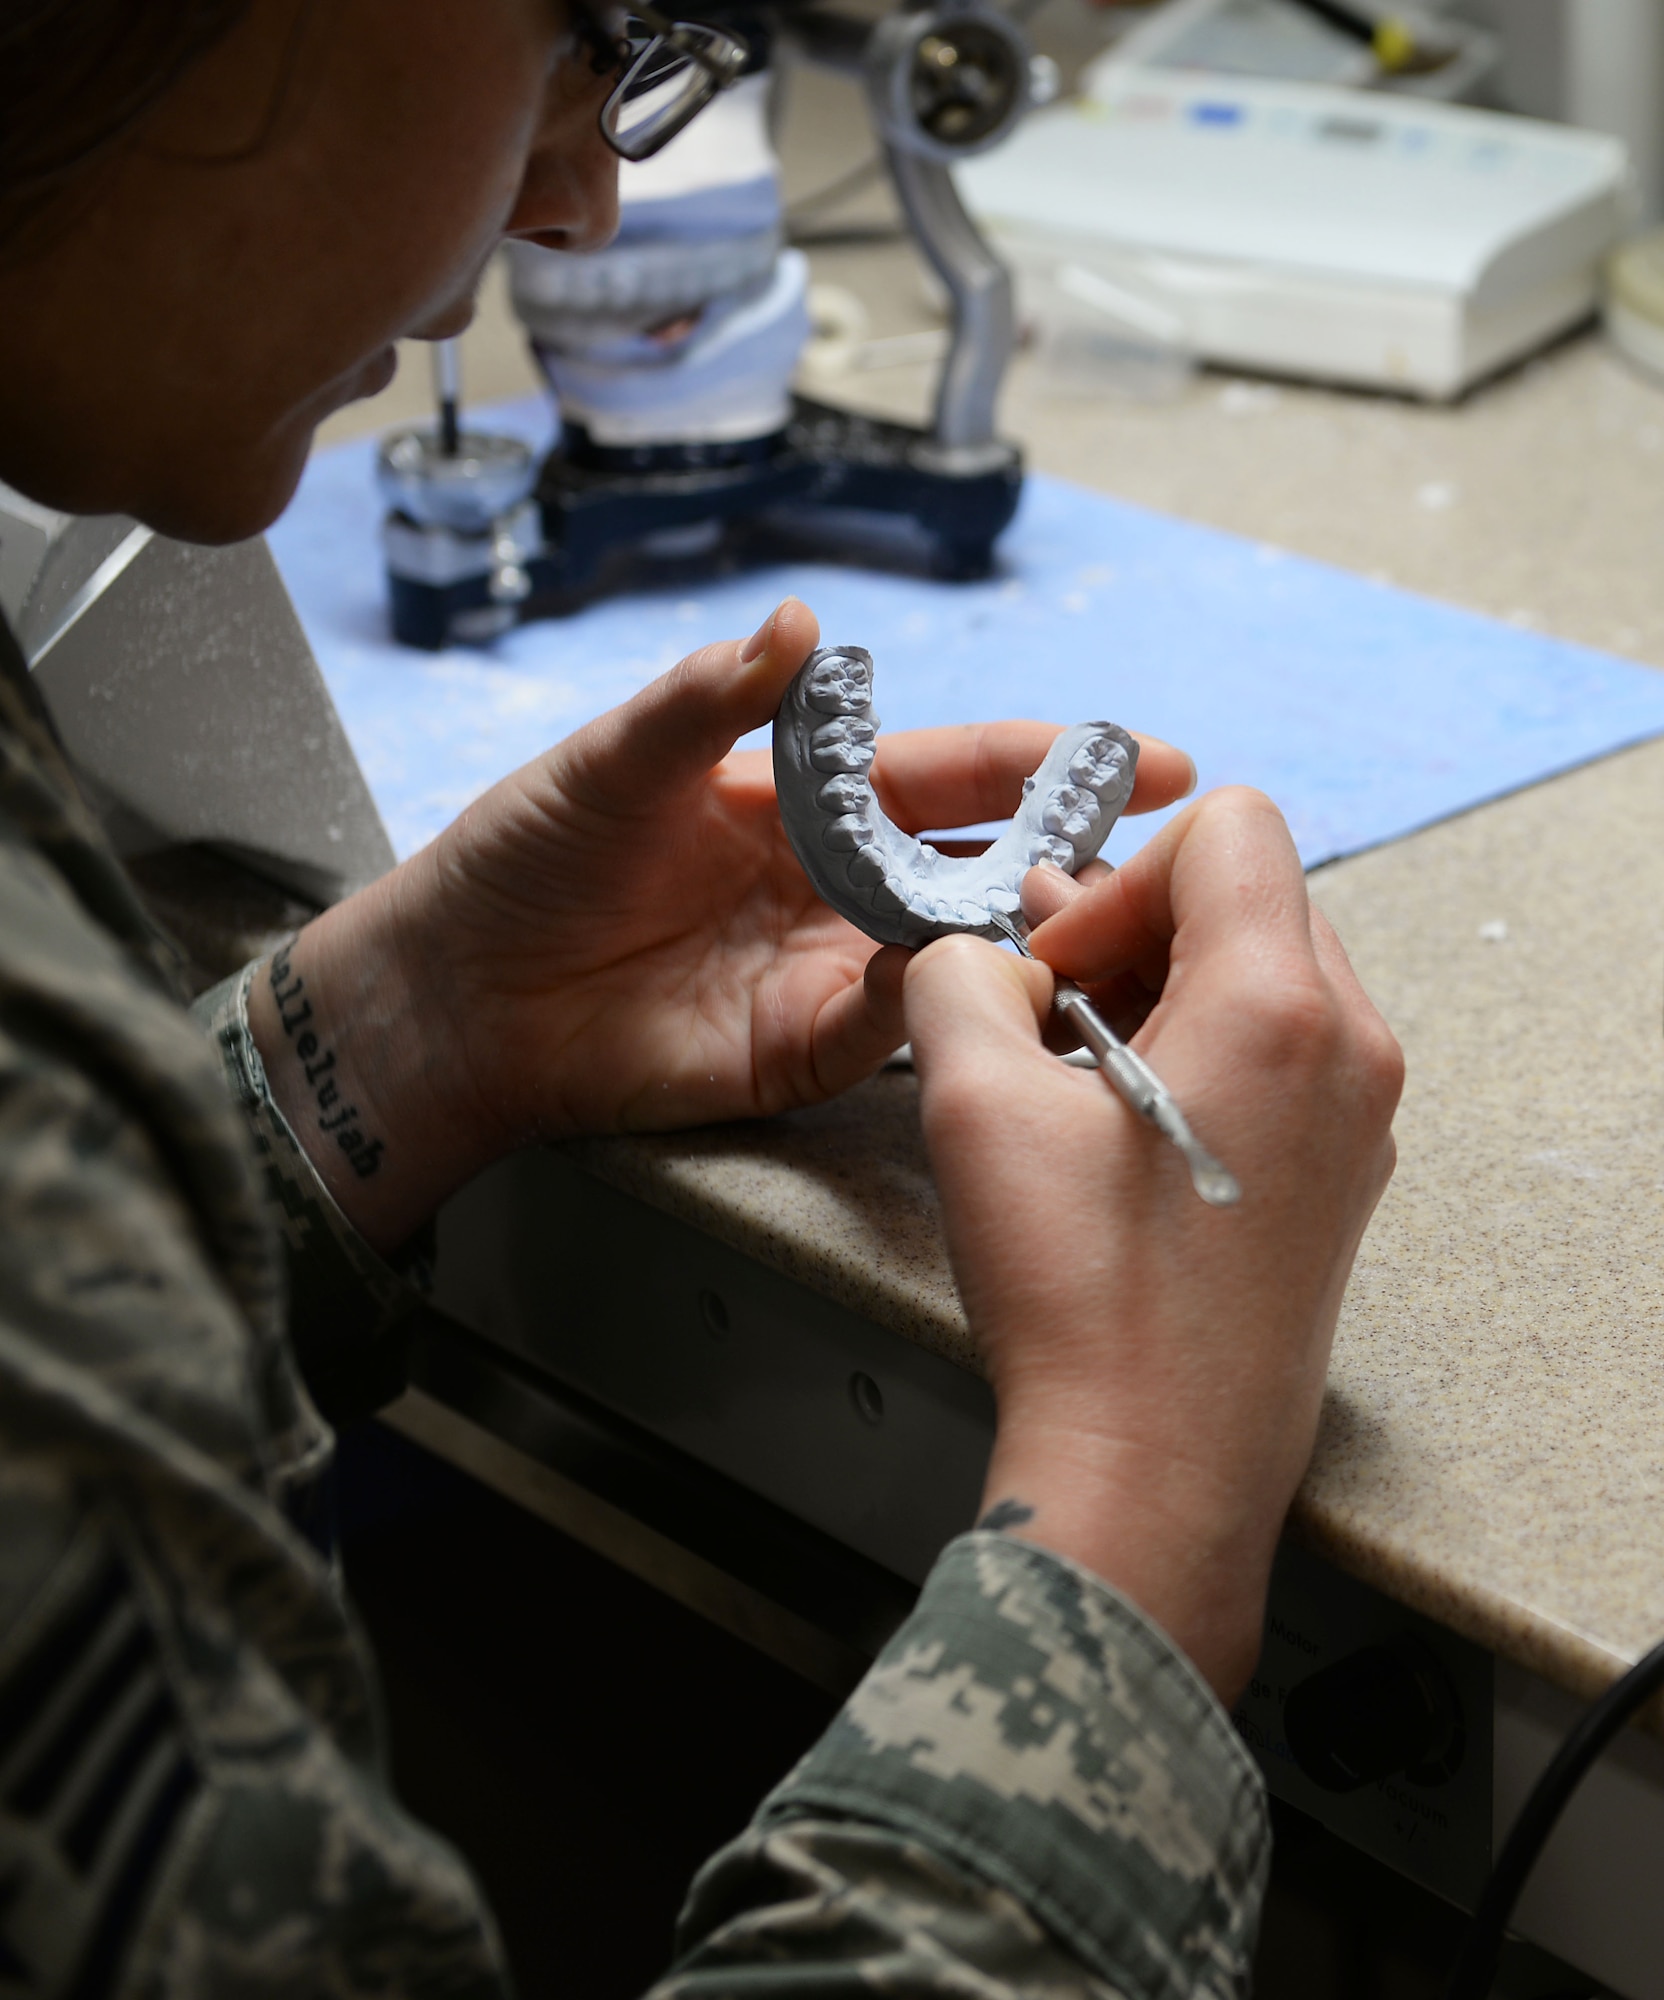 Staff Sgt. Maria Schinella, 14th Medical Operations Squadron dental laboratory technician, works on a patient’s mouth mold Nov. 7, 2018, on Columbus Air Force Base, Mississippi. The molds are used to fit a variety of prostheses including dentures, posts and implants. (U.S. Air Force photo by Airman Hannah Bean)